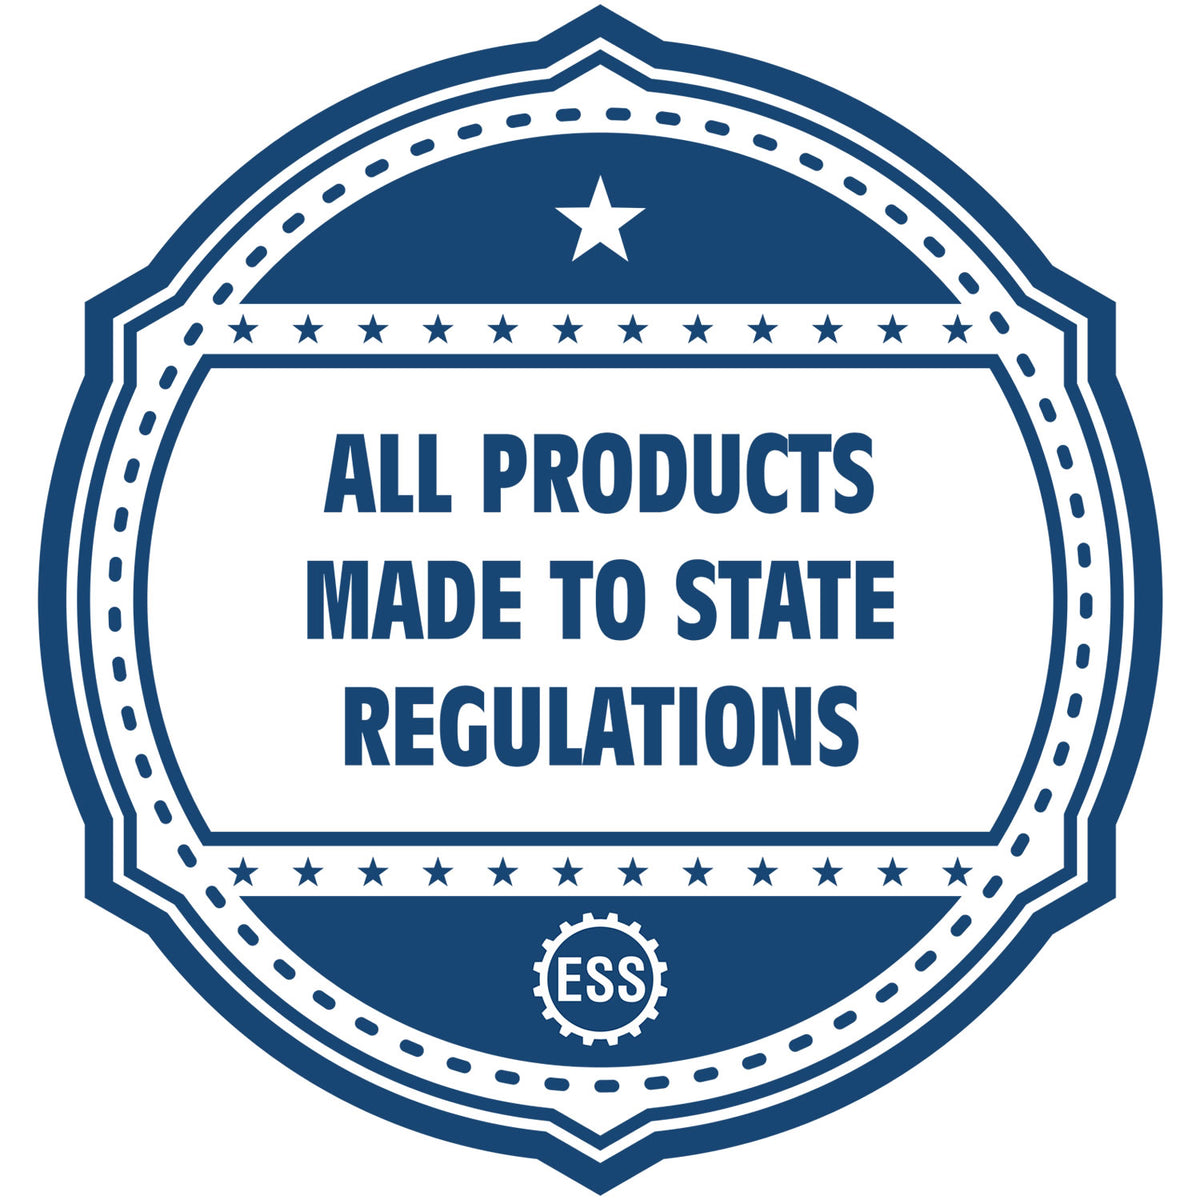 An icon or badge element for the Long Reach Arkansas Land Surveyor Seal showing that this product is made in compliance with state regulations.